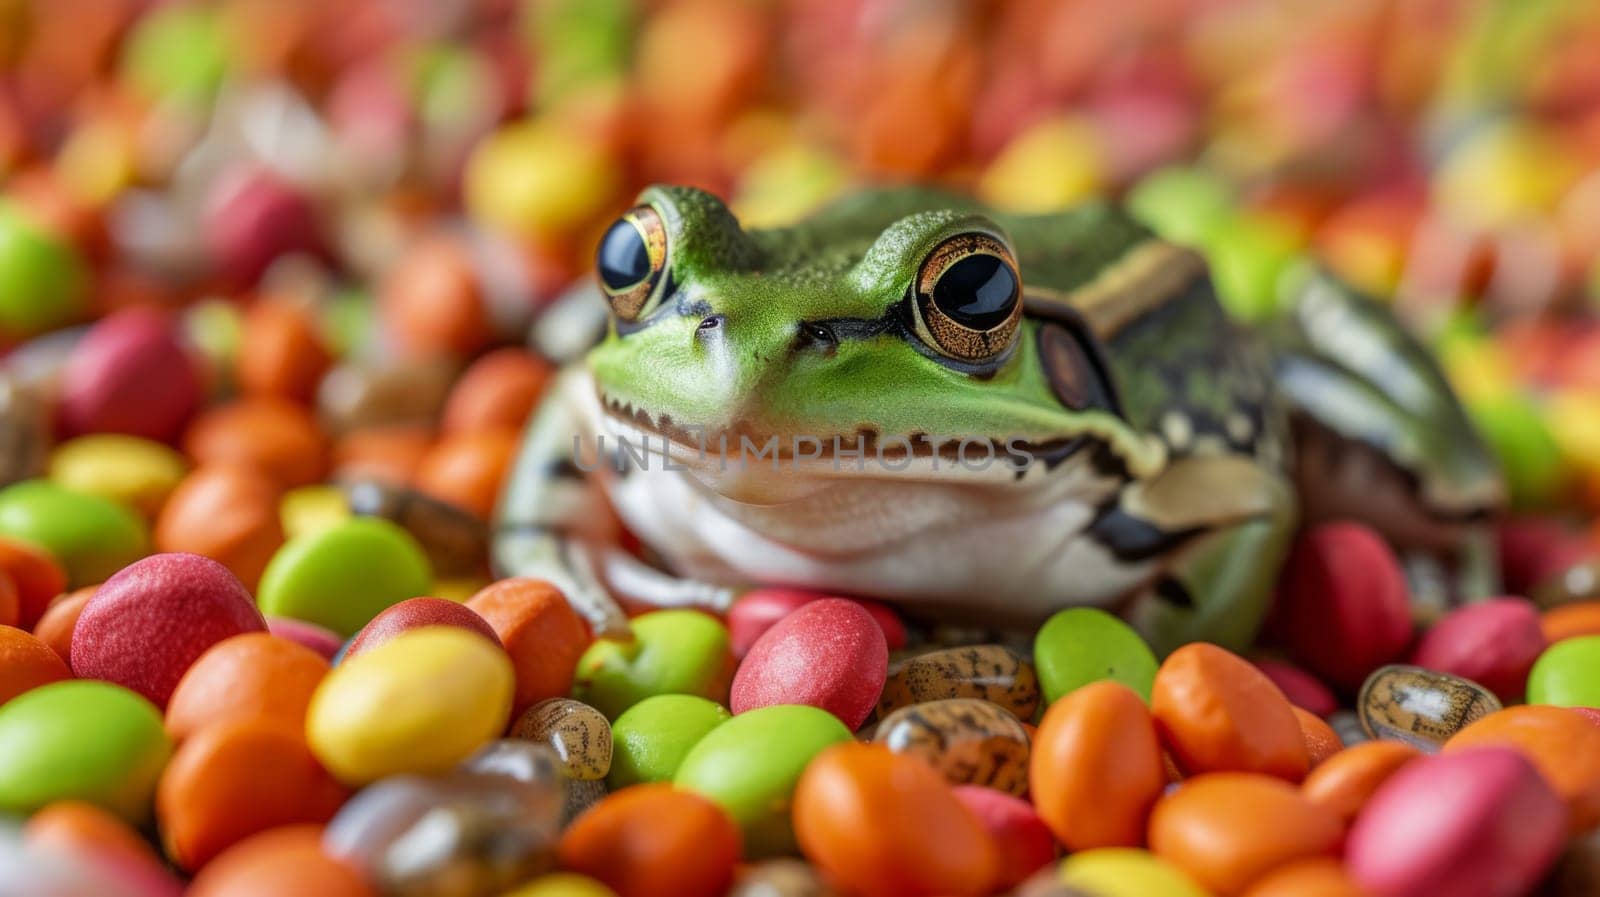 A frog sitting on a pile of candy beans and other candies